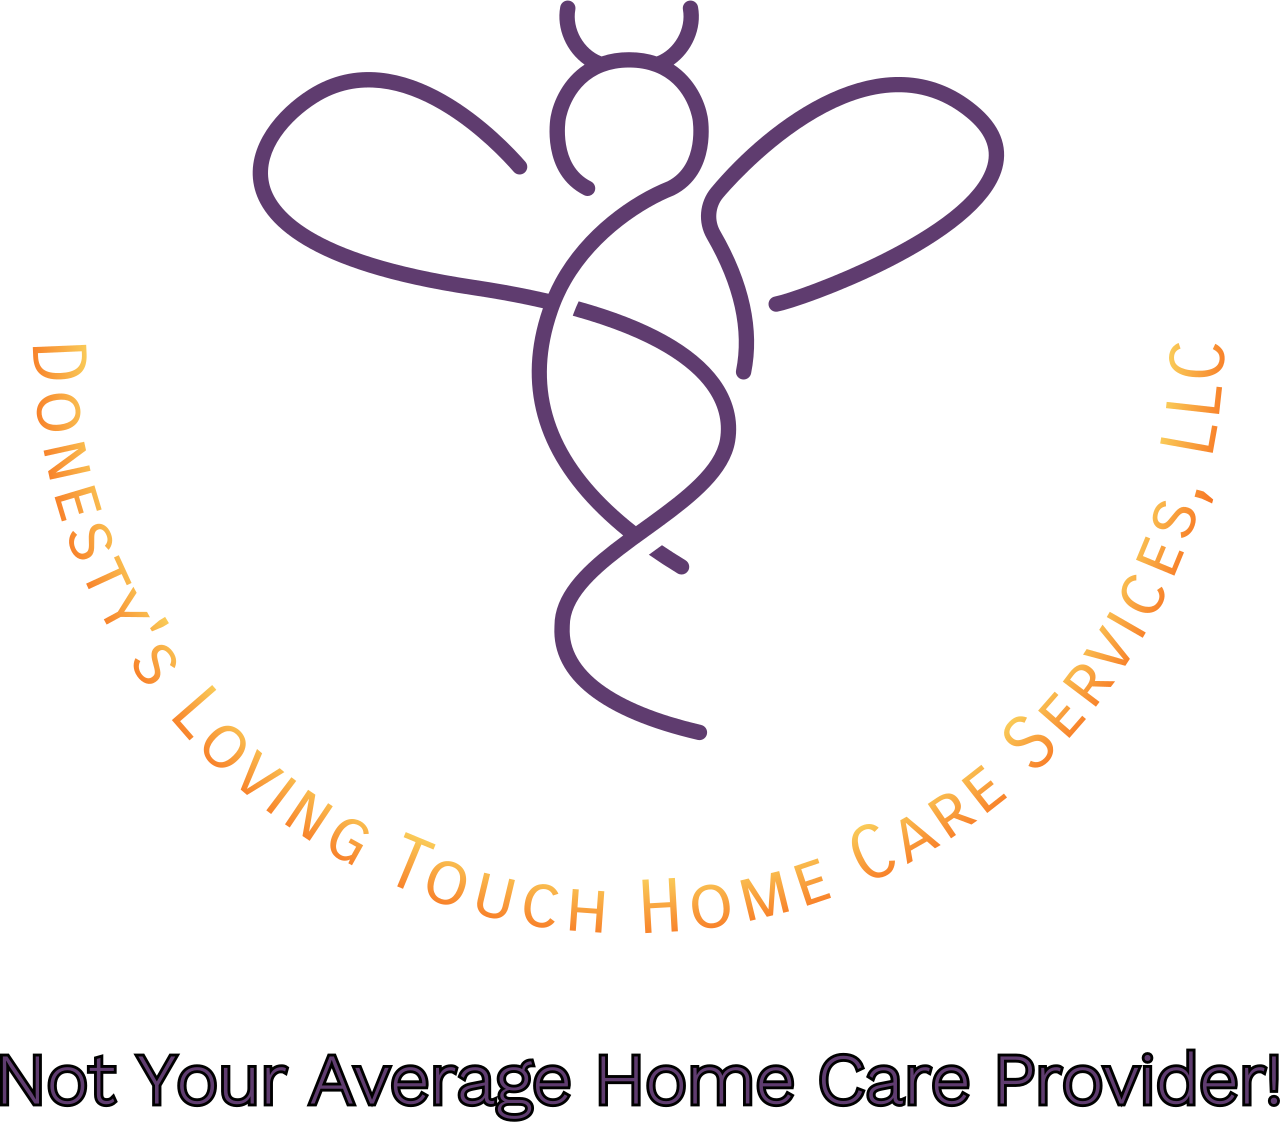 Donesty's Loving Touch Home Care Services, LLC's web page